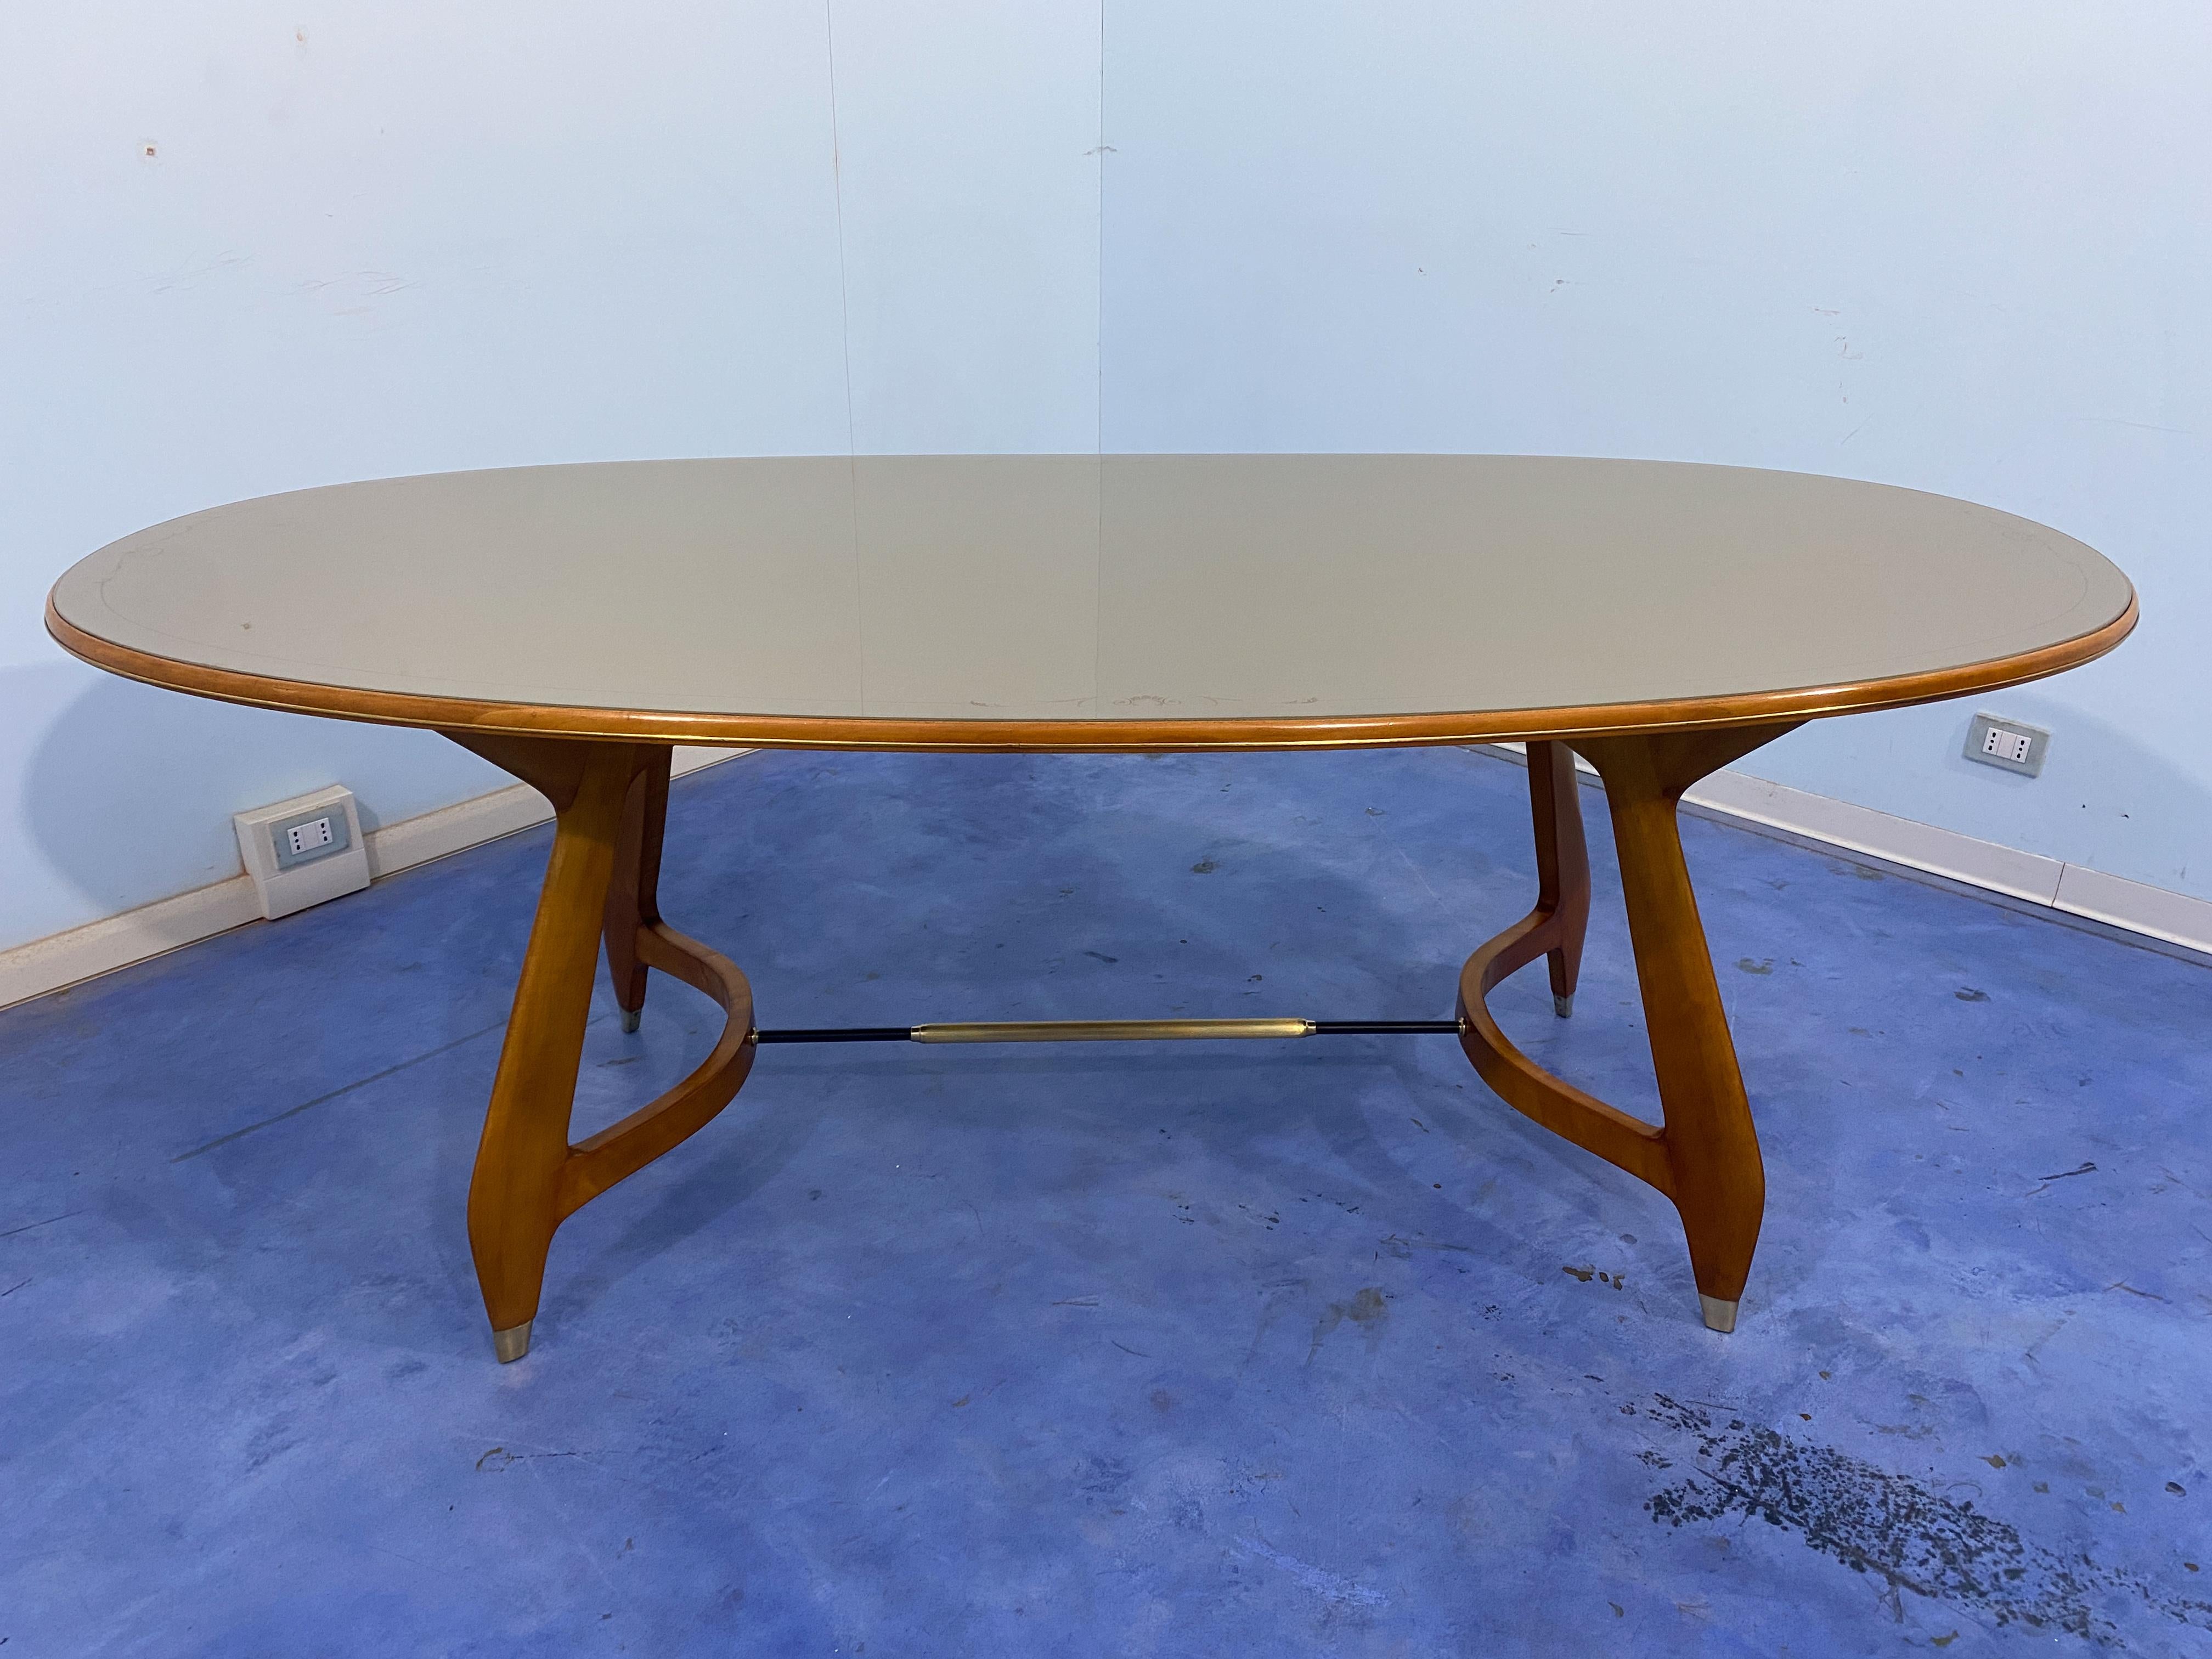 Italian Midcentury Green Olive Dining Table by Vittorio Dassi, 1950s For Sale 5